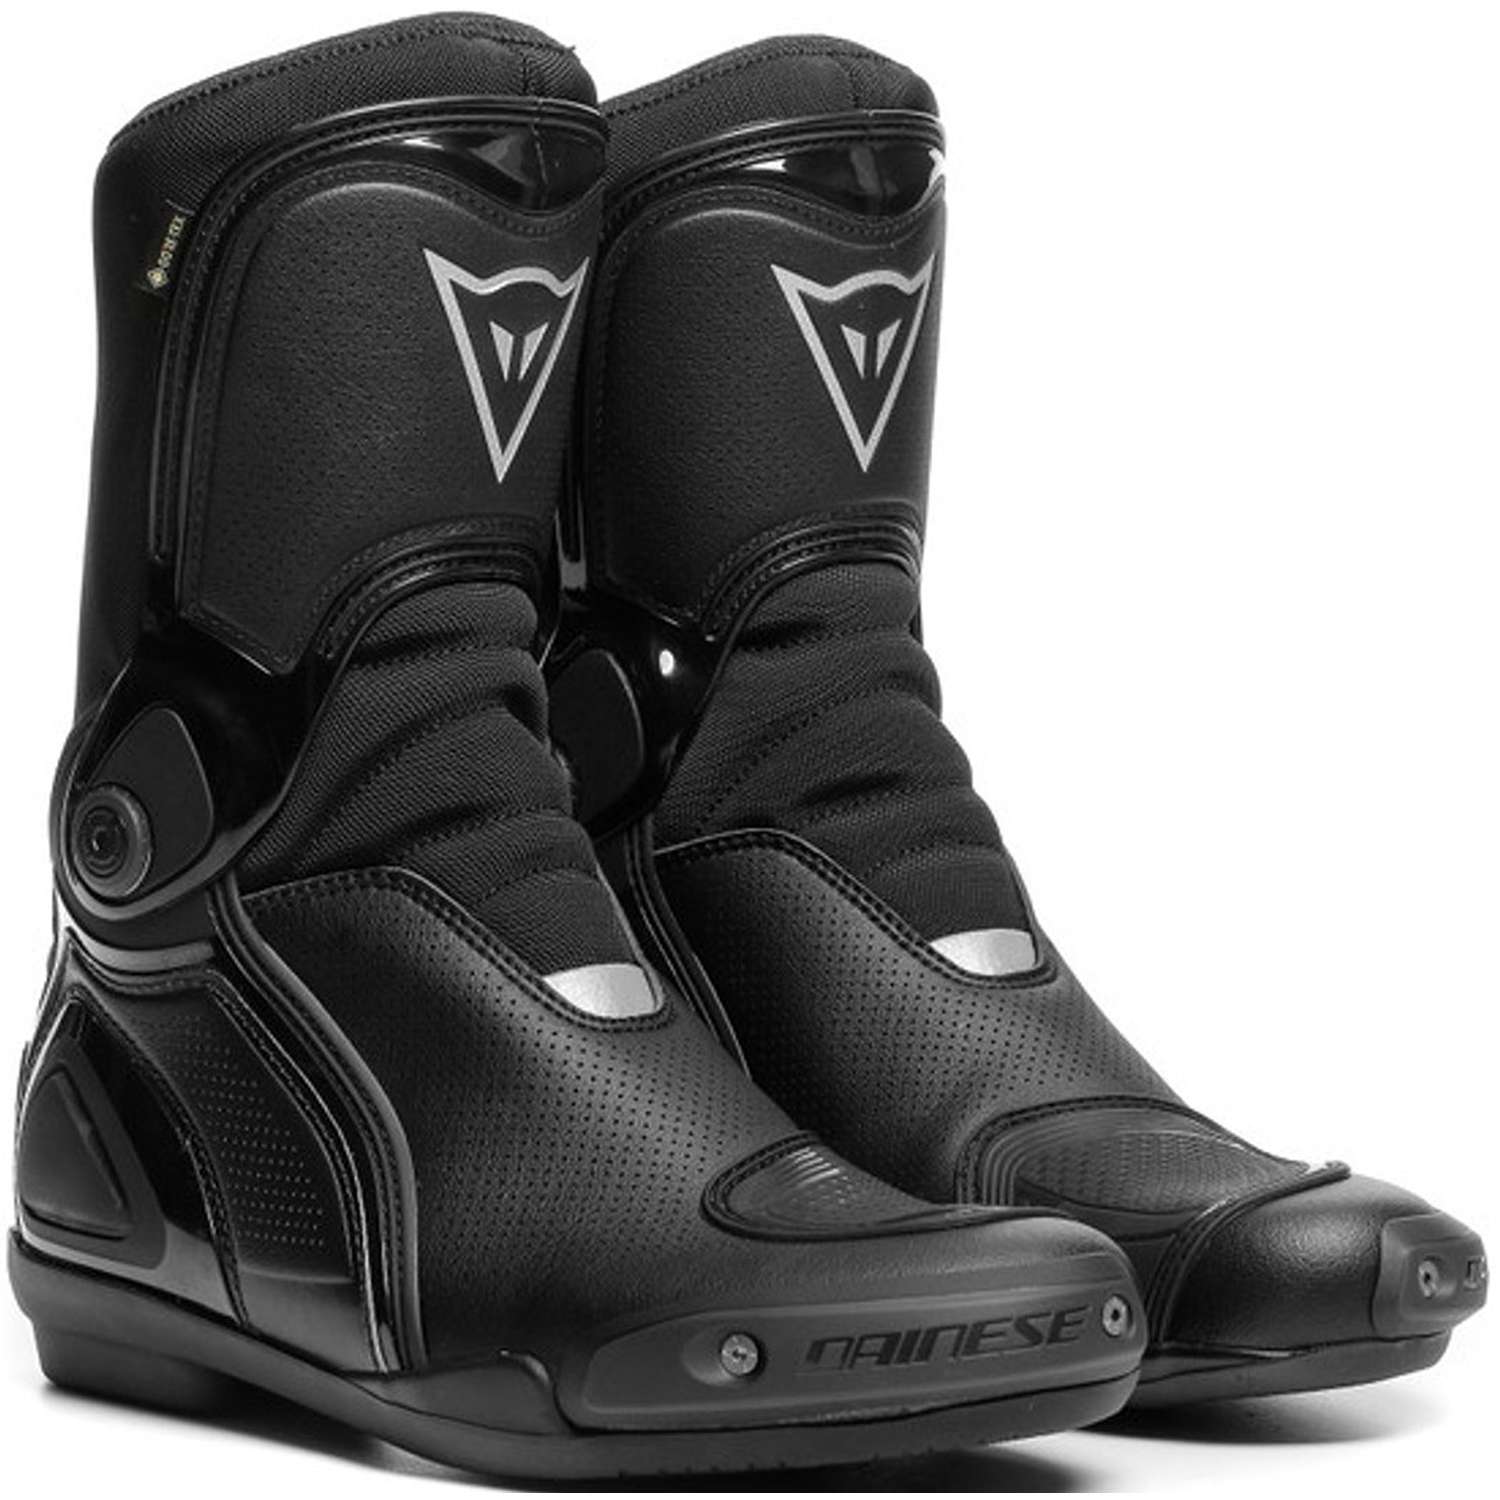 Image of Dainese Sport Master Gore-Tex Boots Black Size 45 EN